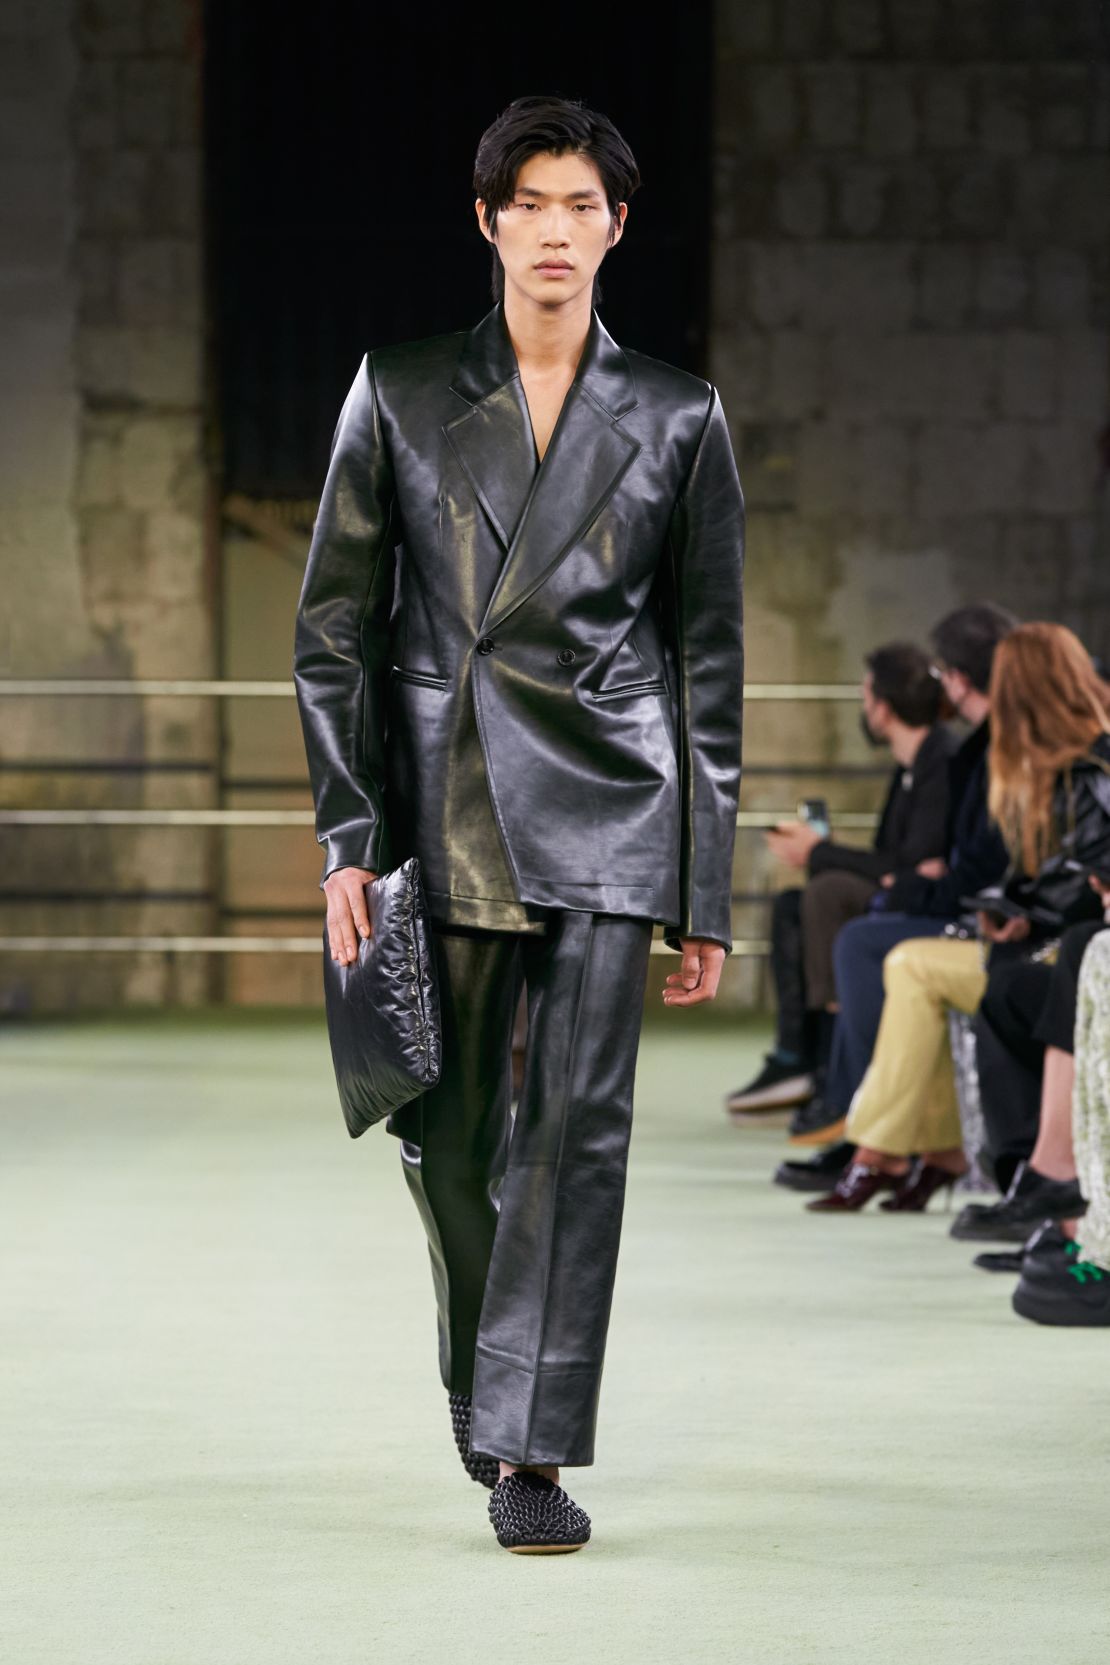 Suits made of herringbone fabric (pictured under this furry green coat) were on show at the Bottega Veneta catwalk. 